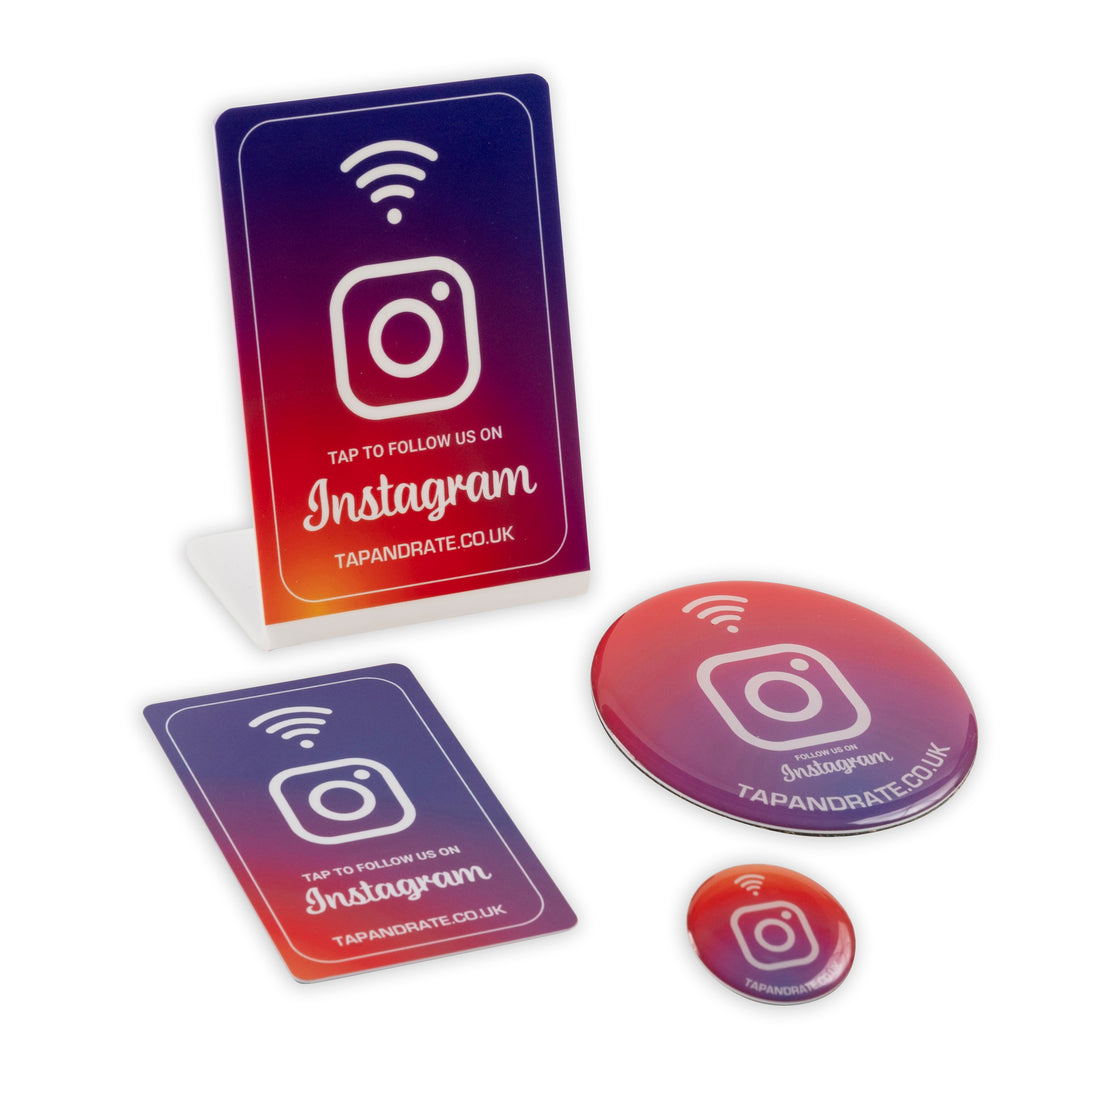 Instagram Super Bundle - NFC Enabled Instagram Followers card. Best chip, premium quality. Customers can follow you and see your profile with just one simple tap. No searching or finding your account, comes linked to your account so all the customer has to do is tap their phone and follow your profile. Ready to use out of the box! Start getting more followers today. Get more Customer with this simple to use product. Tap and Rate